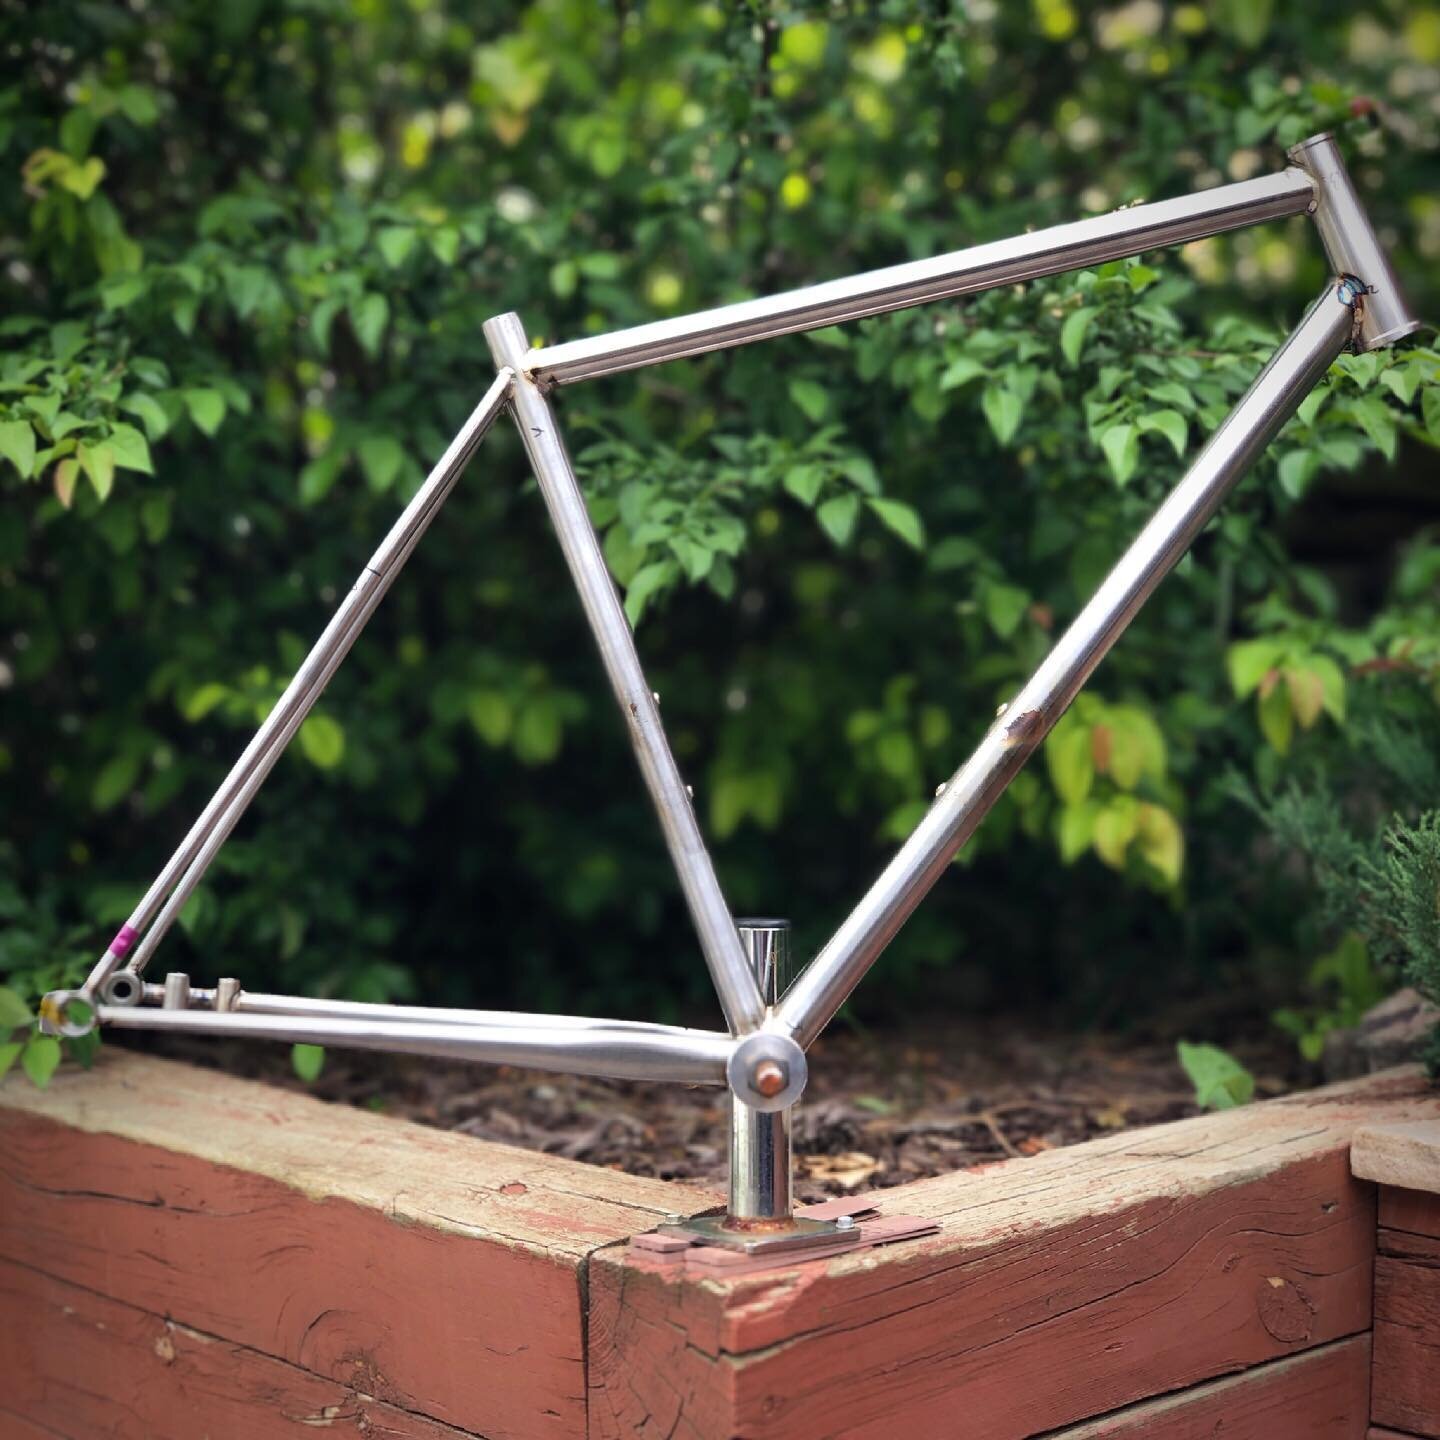 Dreaming about gravel bikes?  Well guess what I have 2 #openplatform Gravel Traveler SL&rsquo;s in stock waiting for you to put your finishing touches on them. Open Platform is one of my semi custom designs in which you can choose your cable routing 